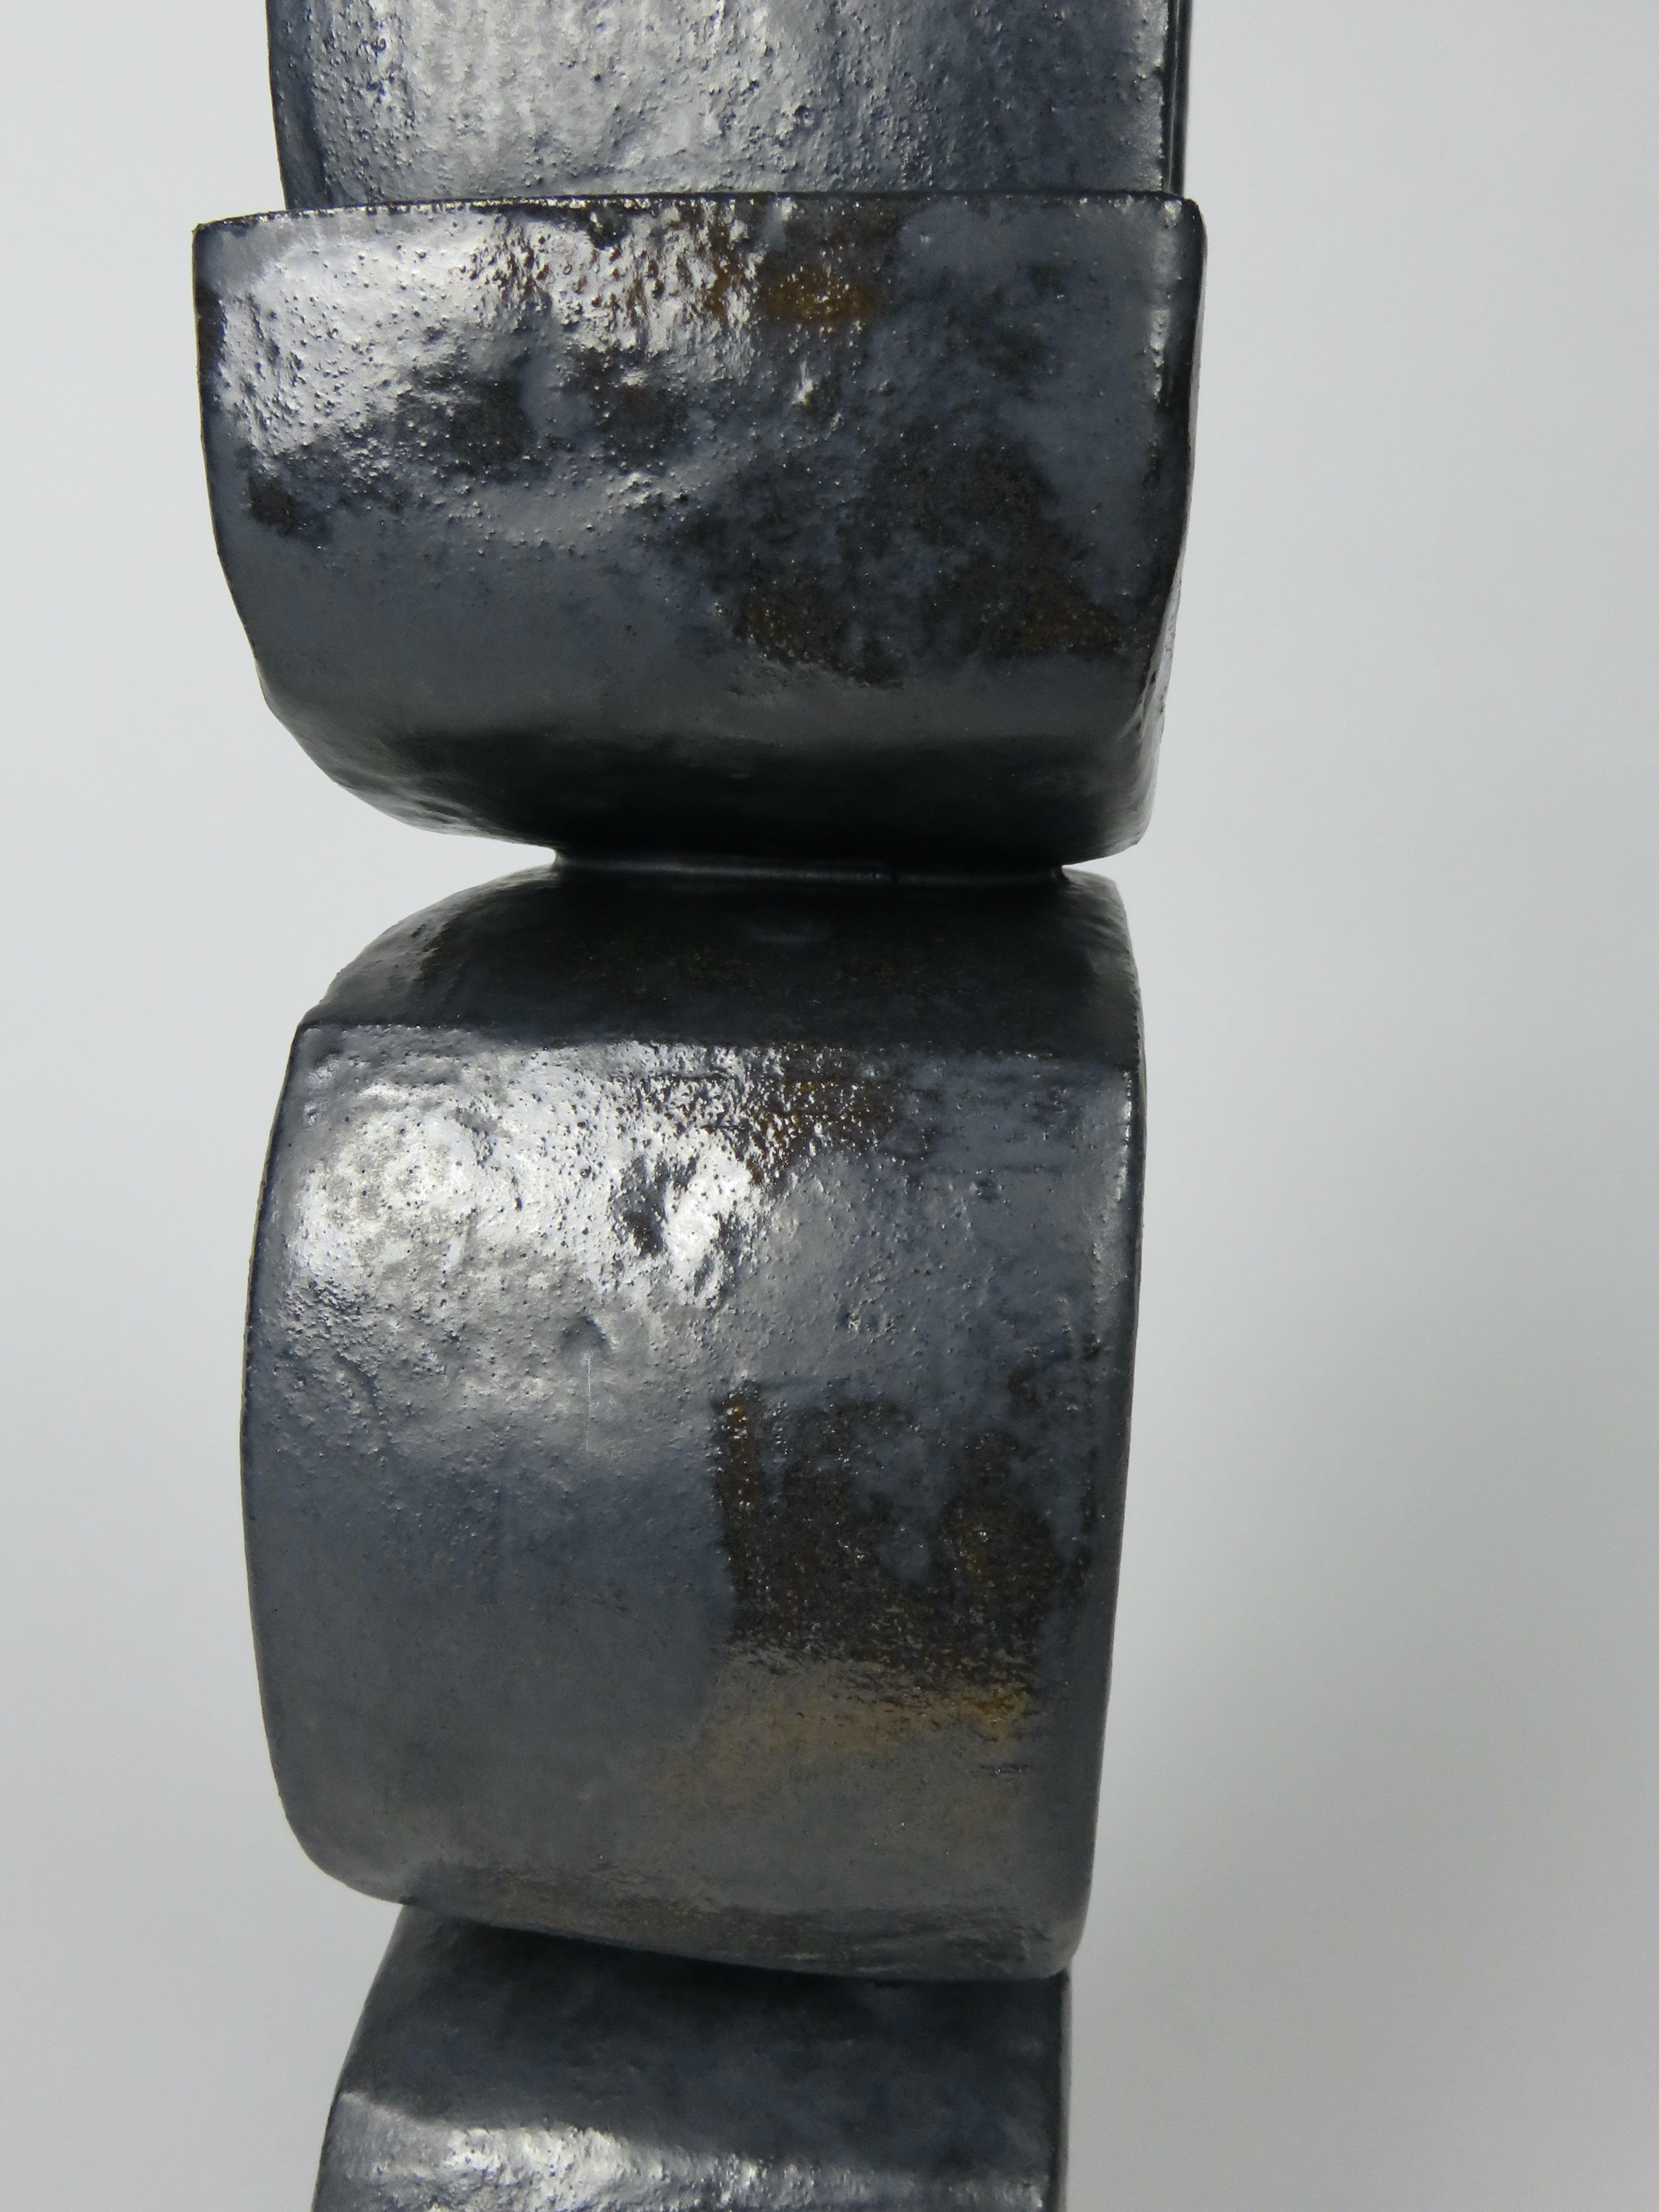 Contemporary 3 Rectangular Ovals on Short Angled Legs, Metallic Black-Glaze Clay Sculpture #2 For Sale